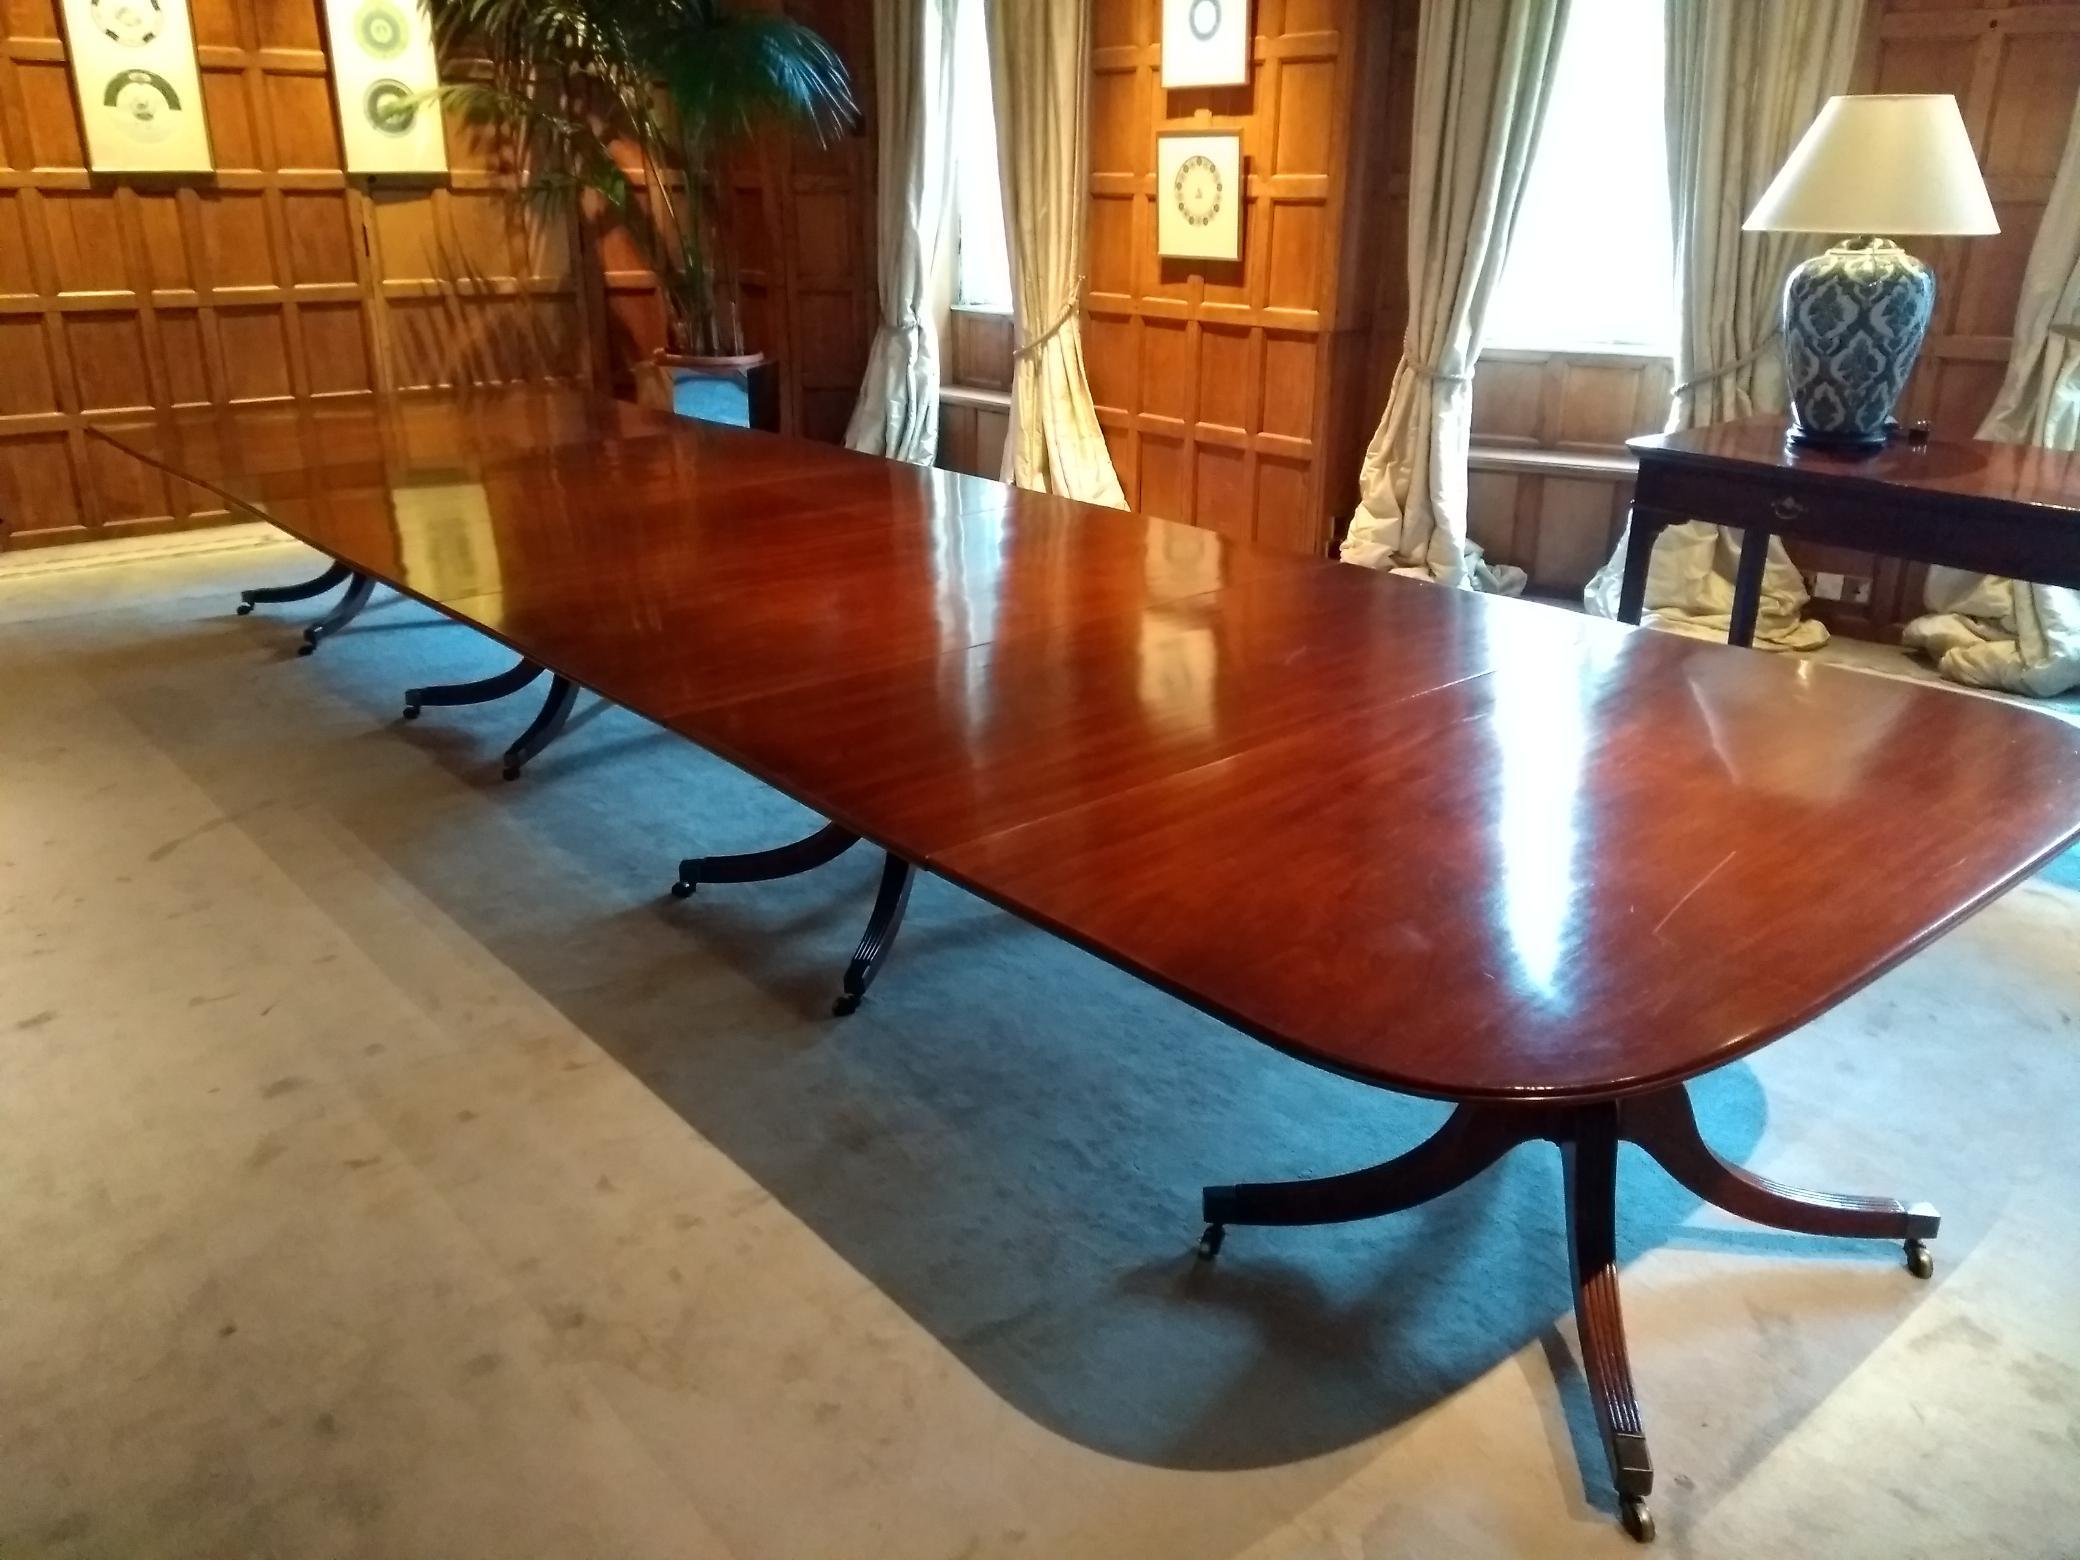 18th century George III period mahogany four pedestal antique dining table. This is one of the best tables we have seen, it is a tremendous scale at almost eighteen feet long and very well drawn. It has elegant outstretched four splay legs which are